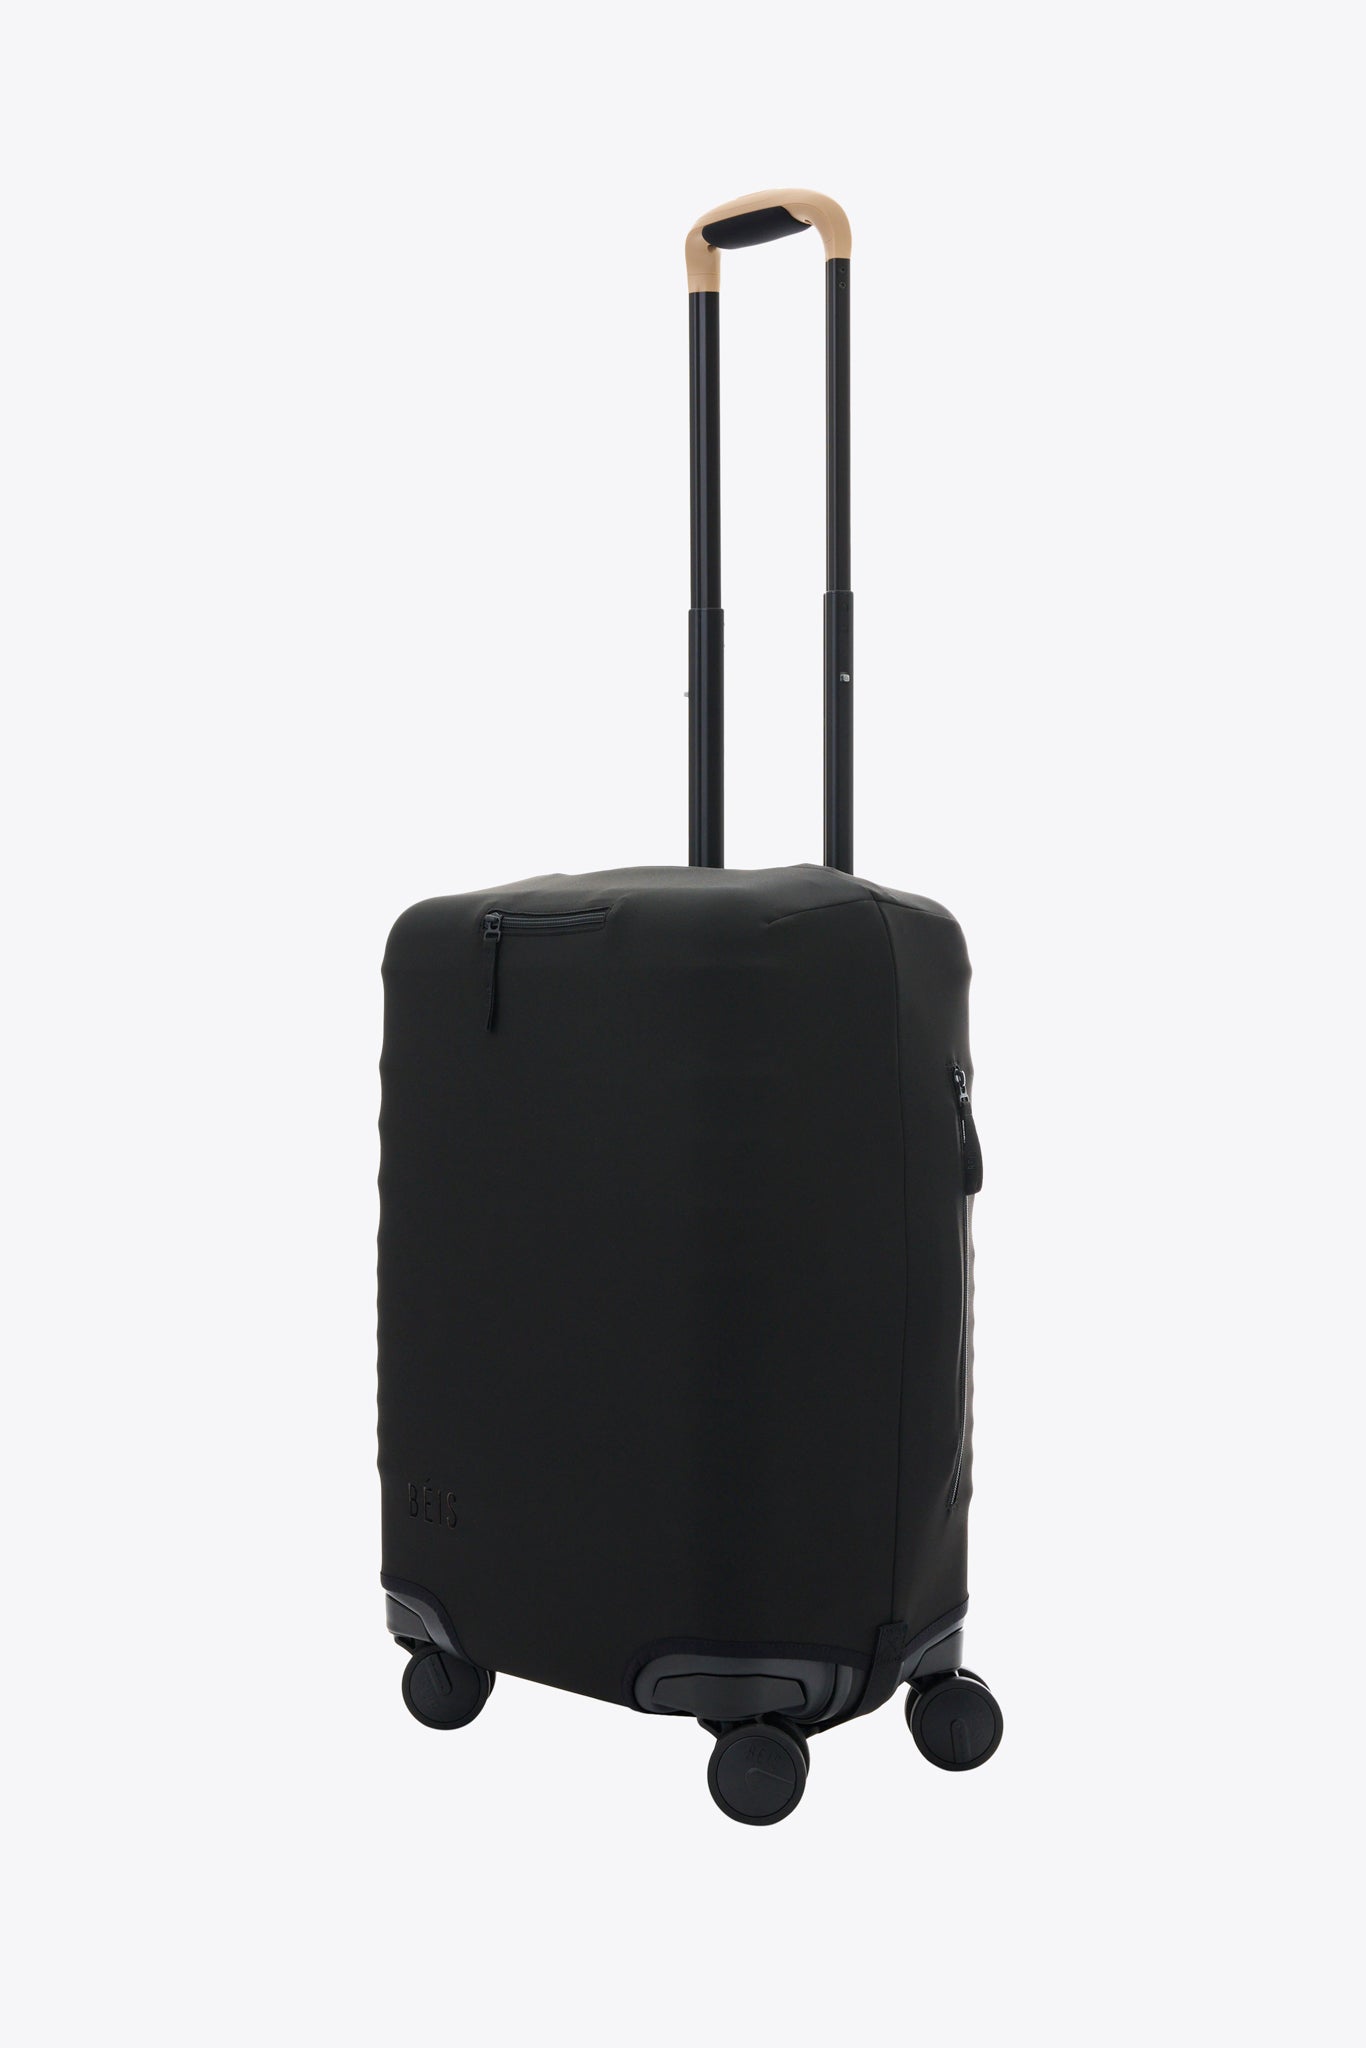 The Carry-On Luggage Cover in Black